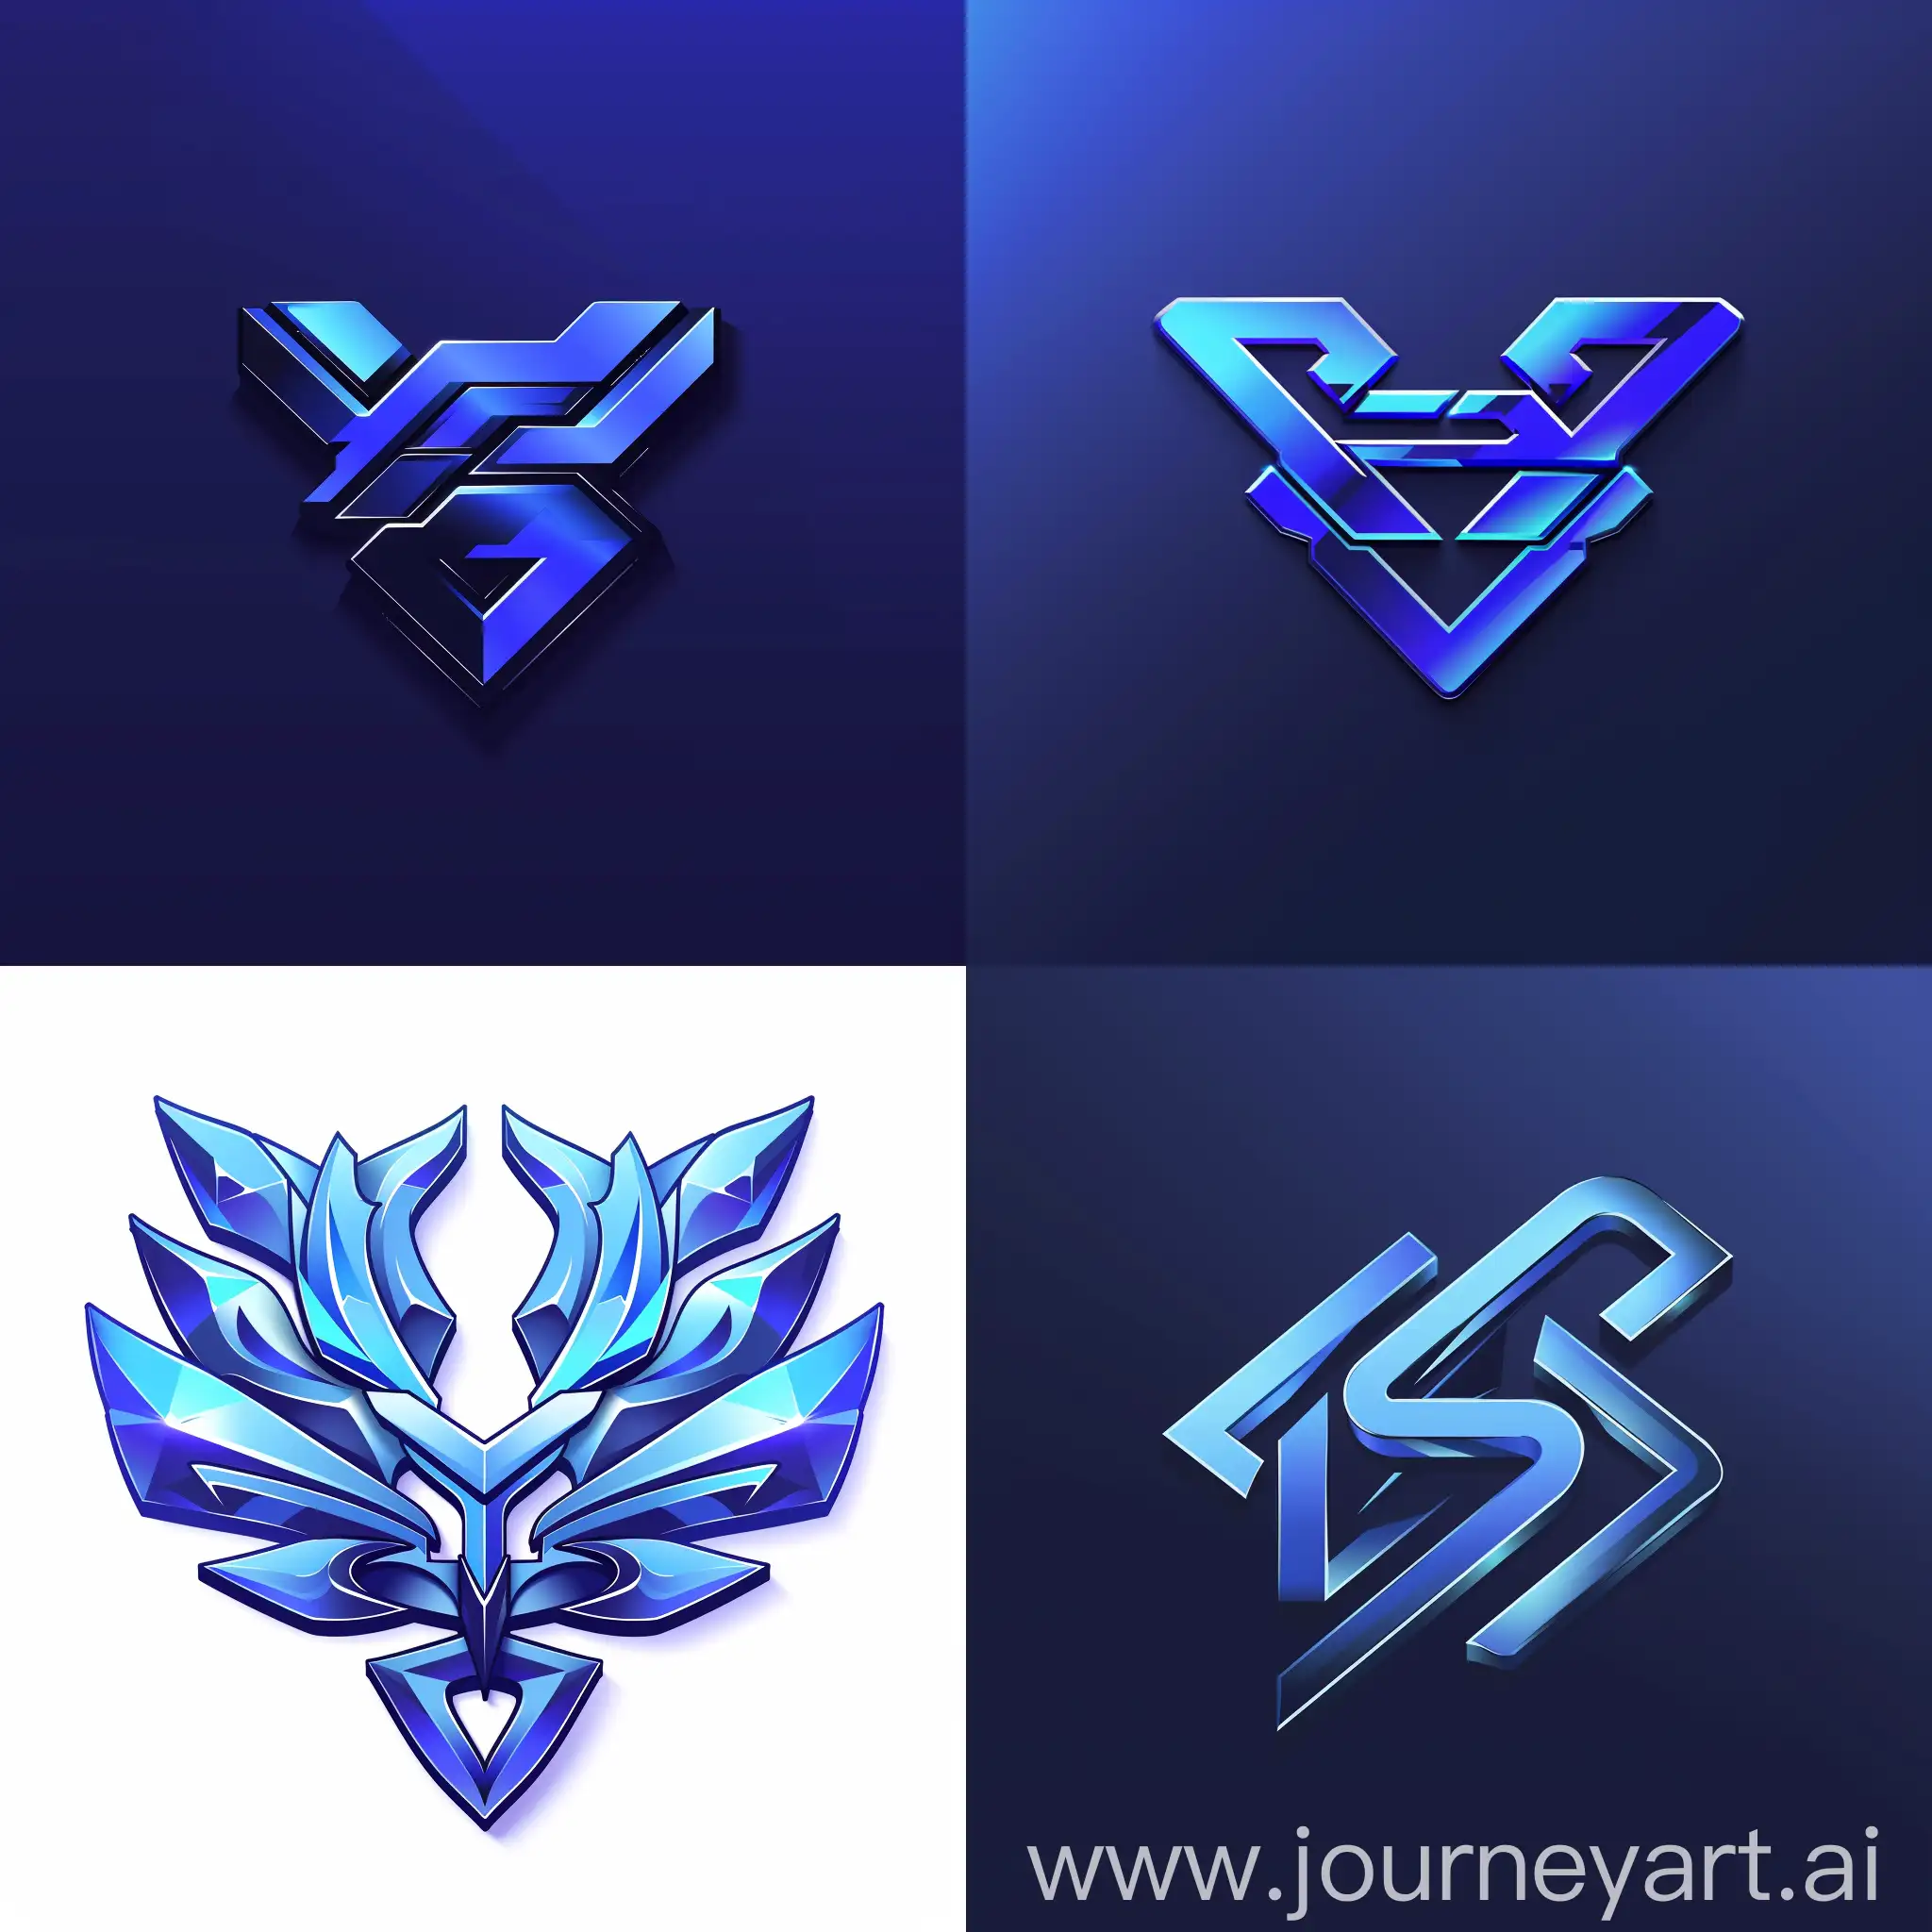 Creative-Gaming-Logo-Design-YSS-in-Intriguing-Blue-Shades